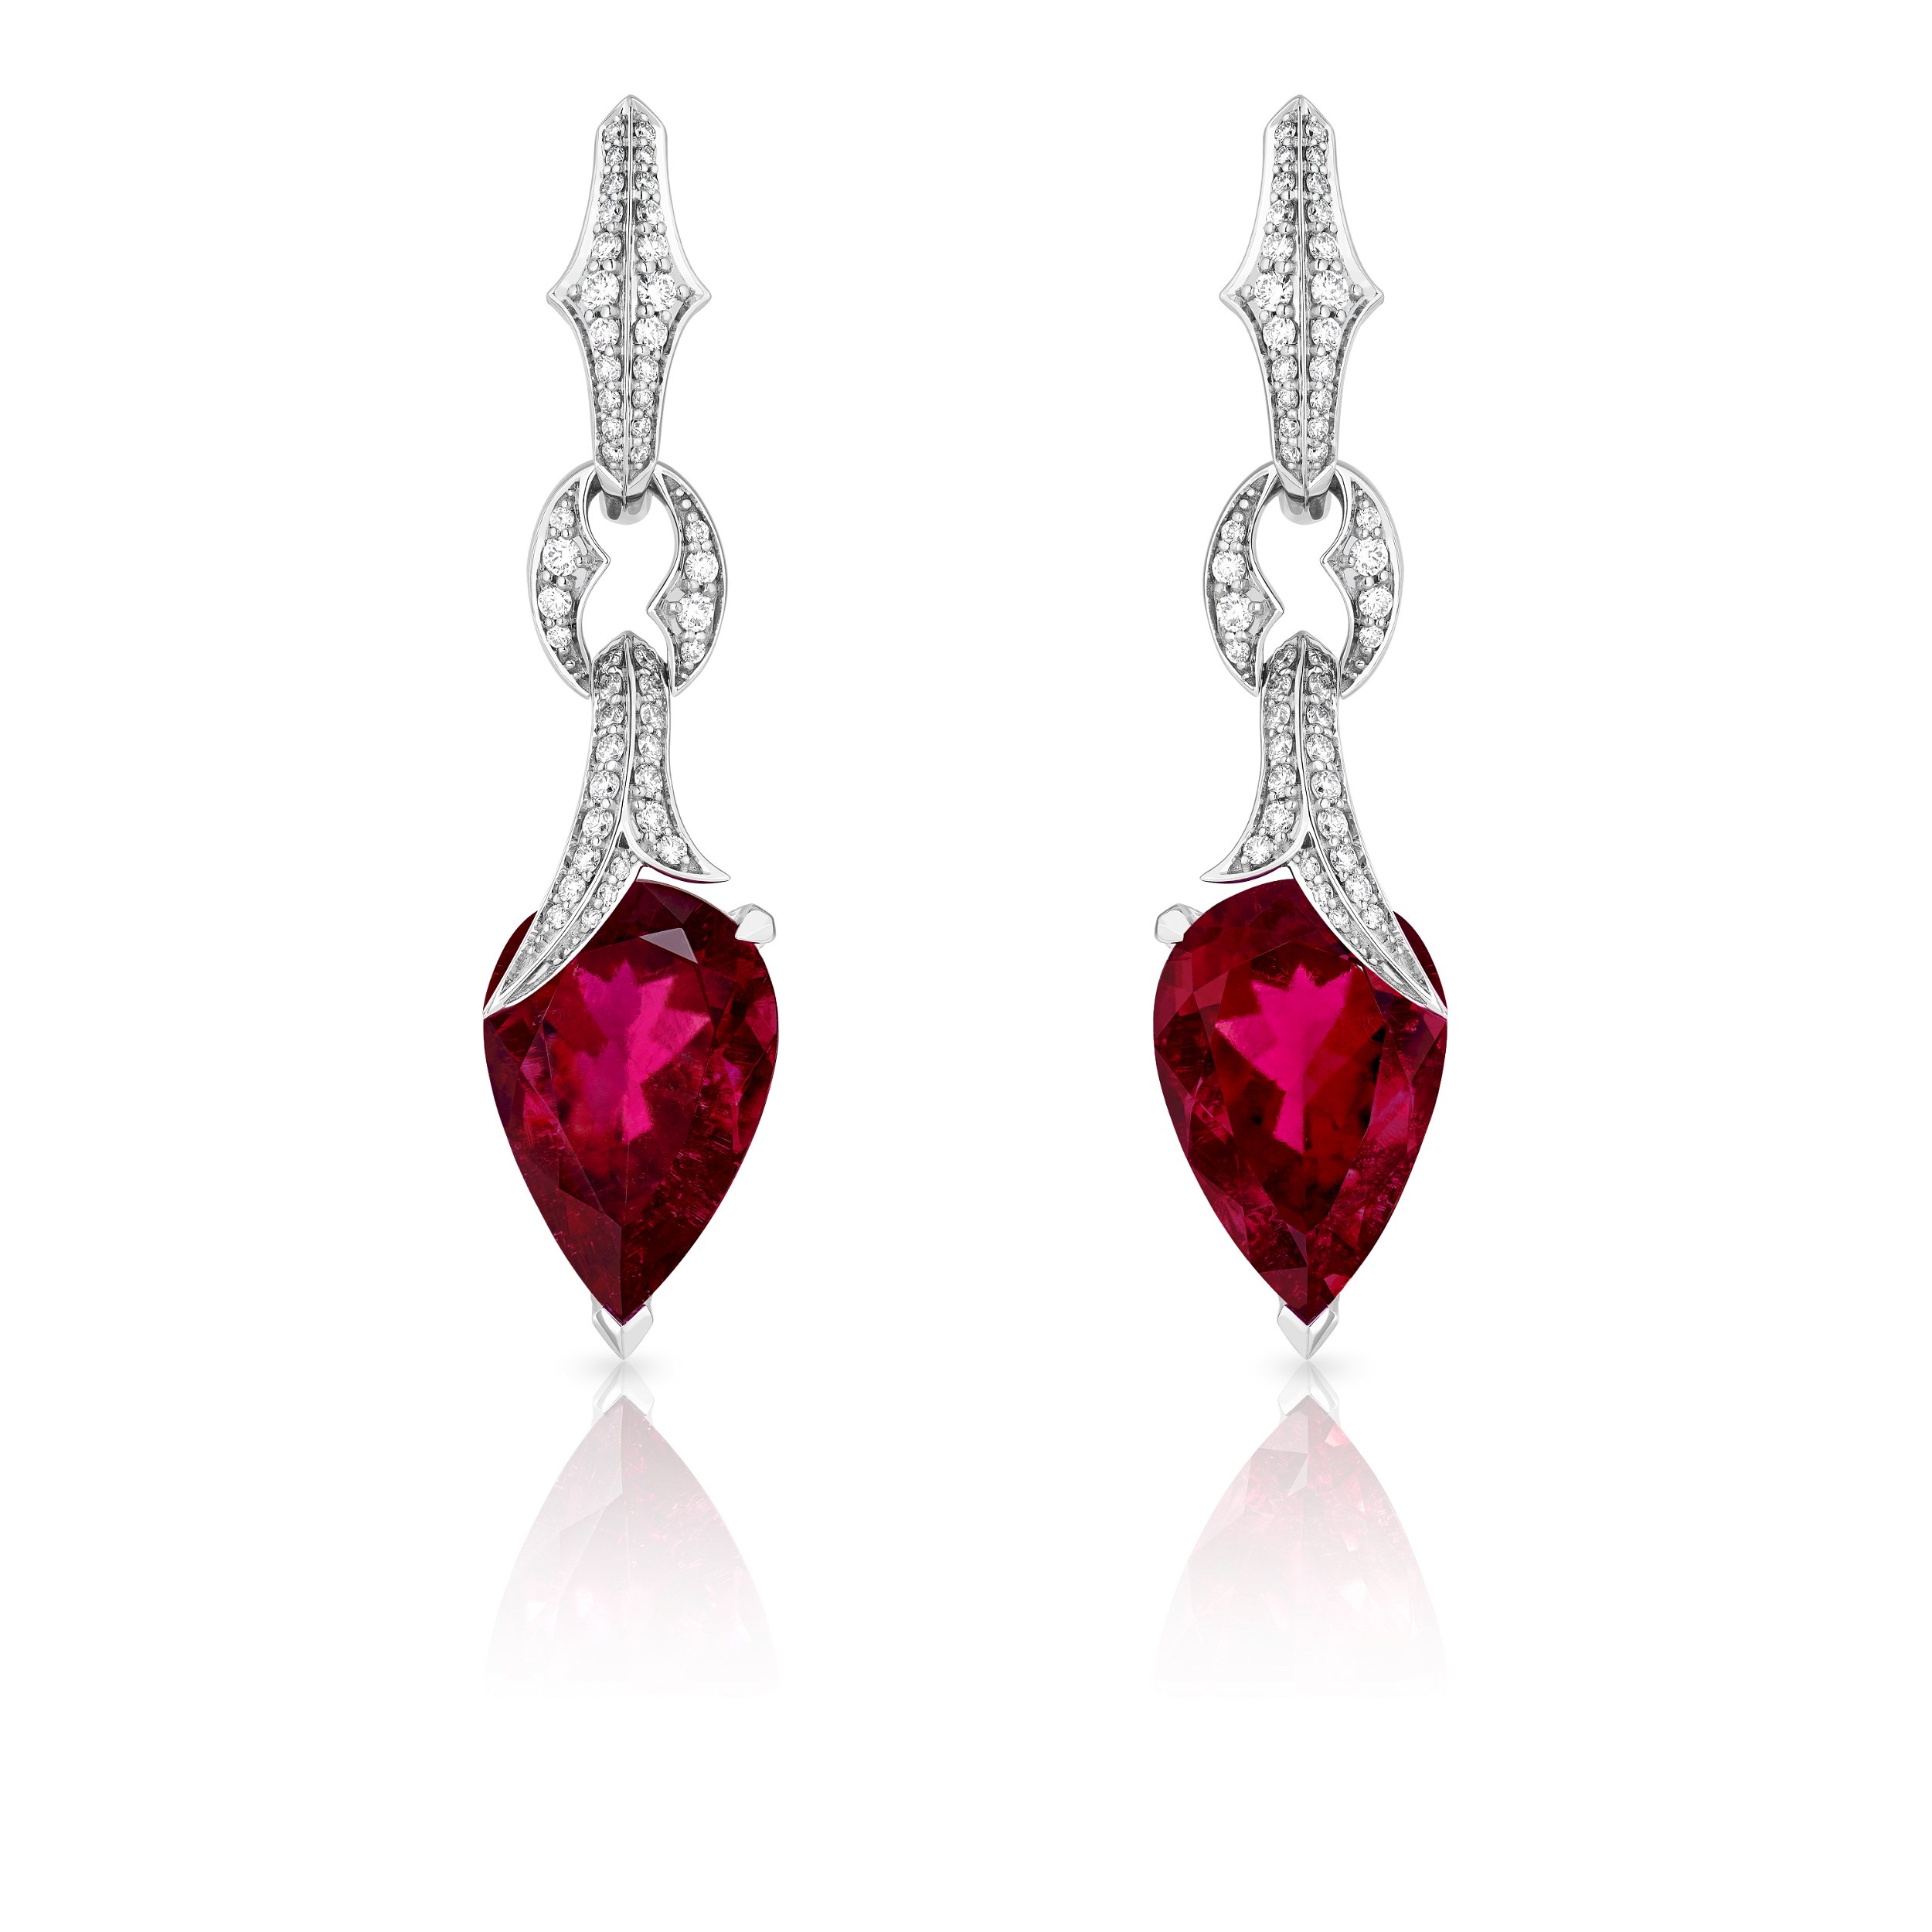 Thorn Embrace Pear Drop Earrings with Rubellite and White Diamonds in 18kt White Gold